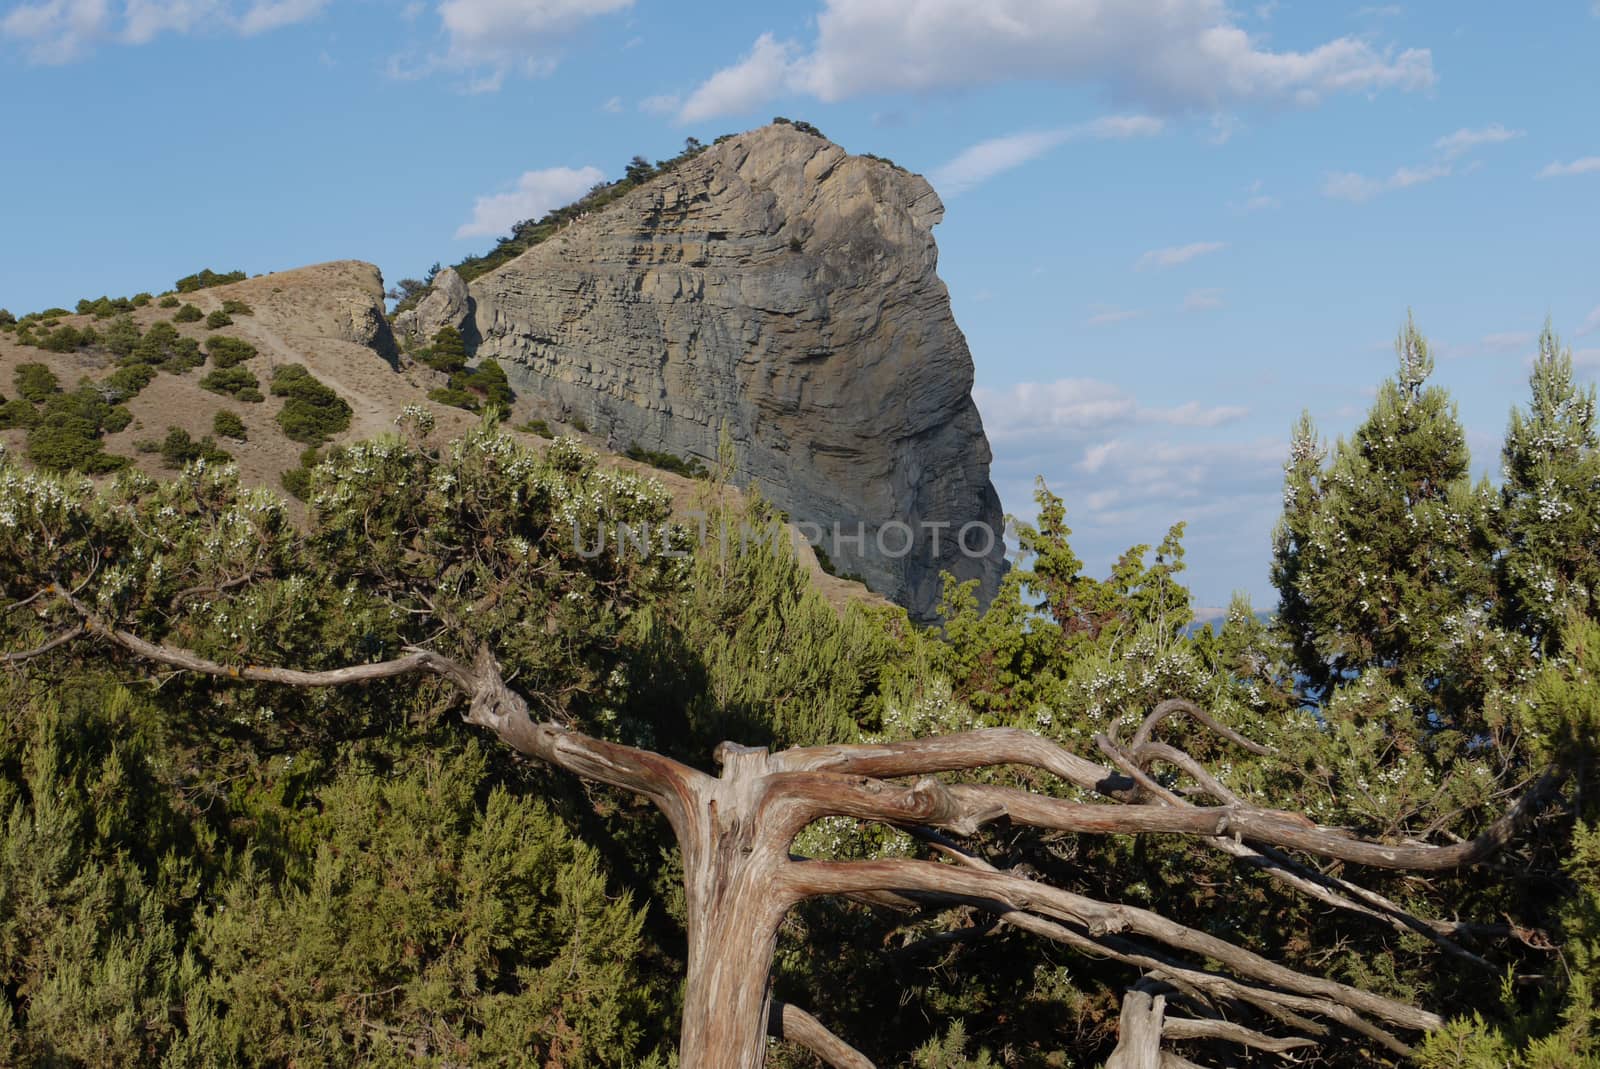 The trunk and branches of trees seem to be from a fairy tale similar to roots without leaves growing in a mountainous area against the background of the top of the rock.